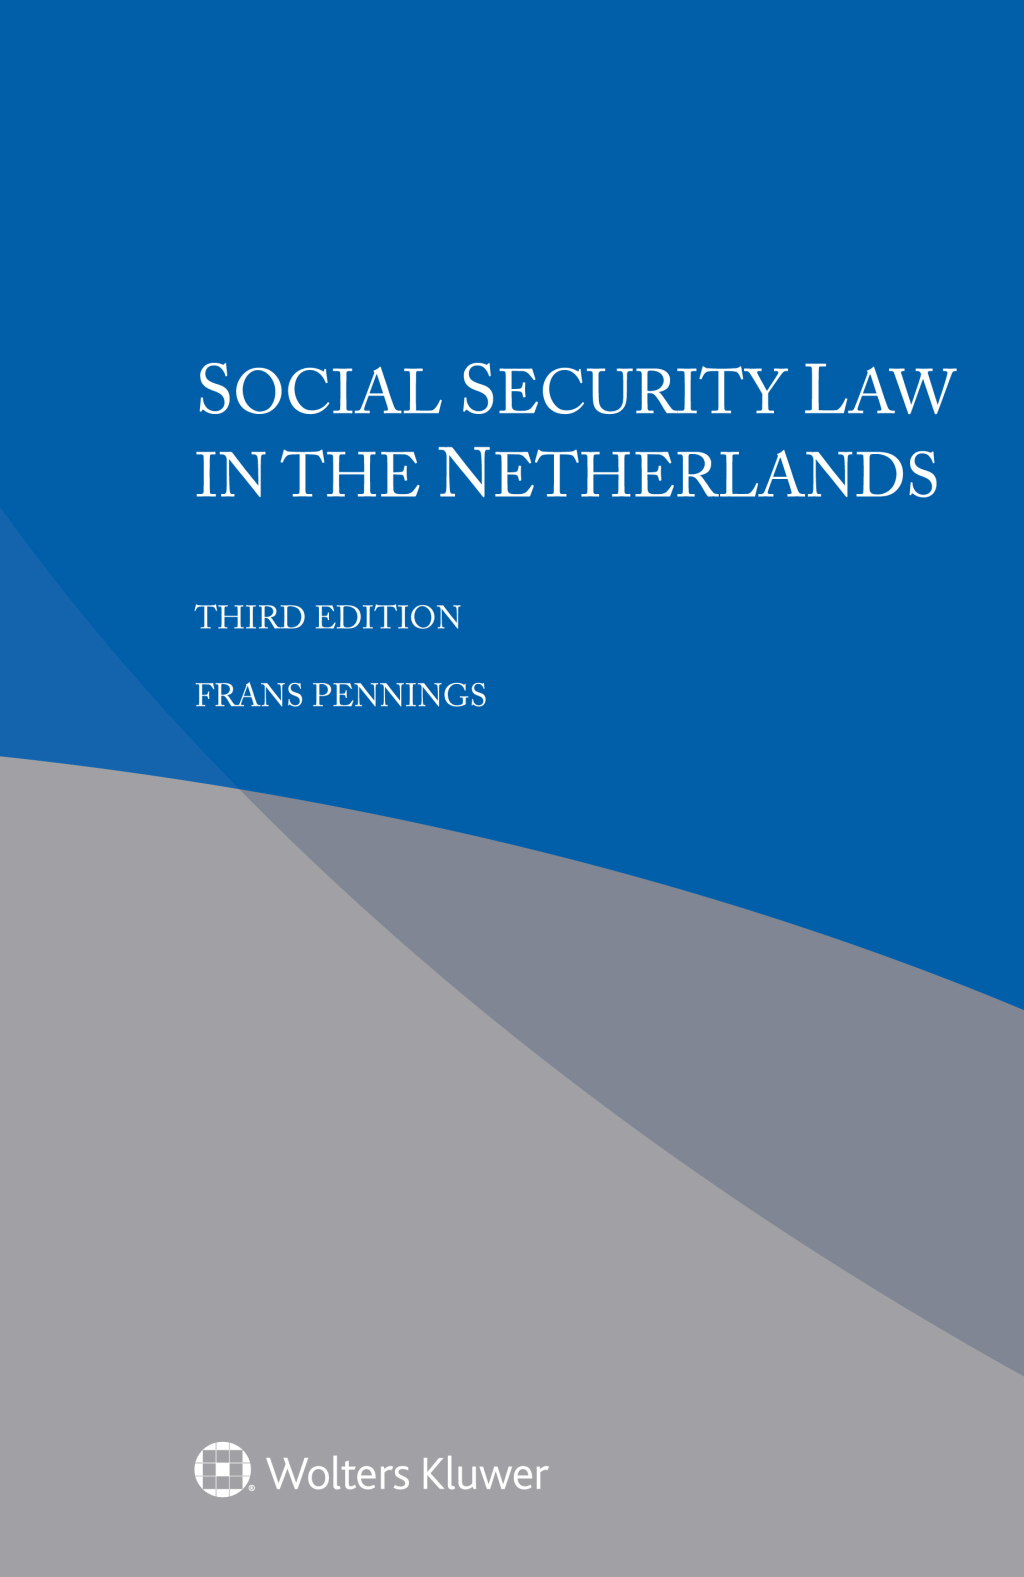 Social Security Law in the Netherlands - 3rd Edition (eBook Rental)